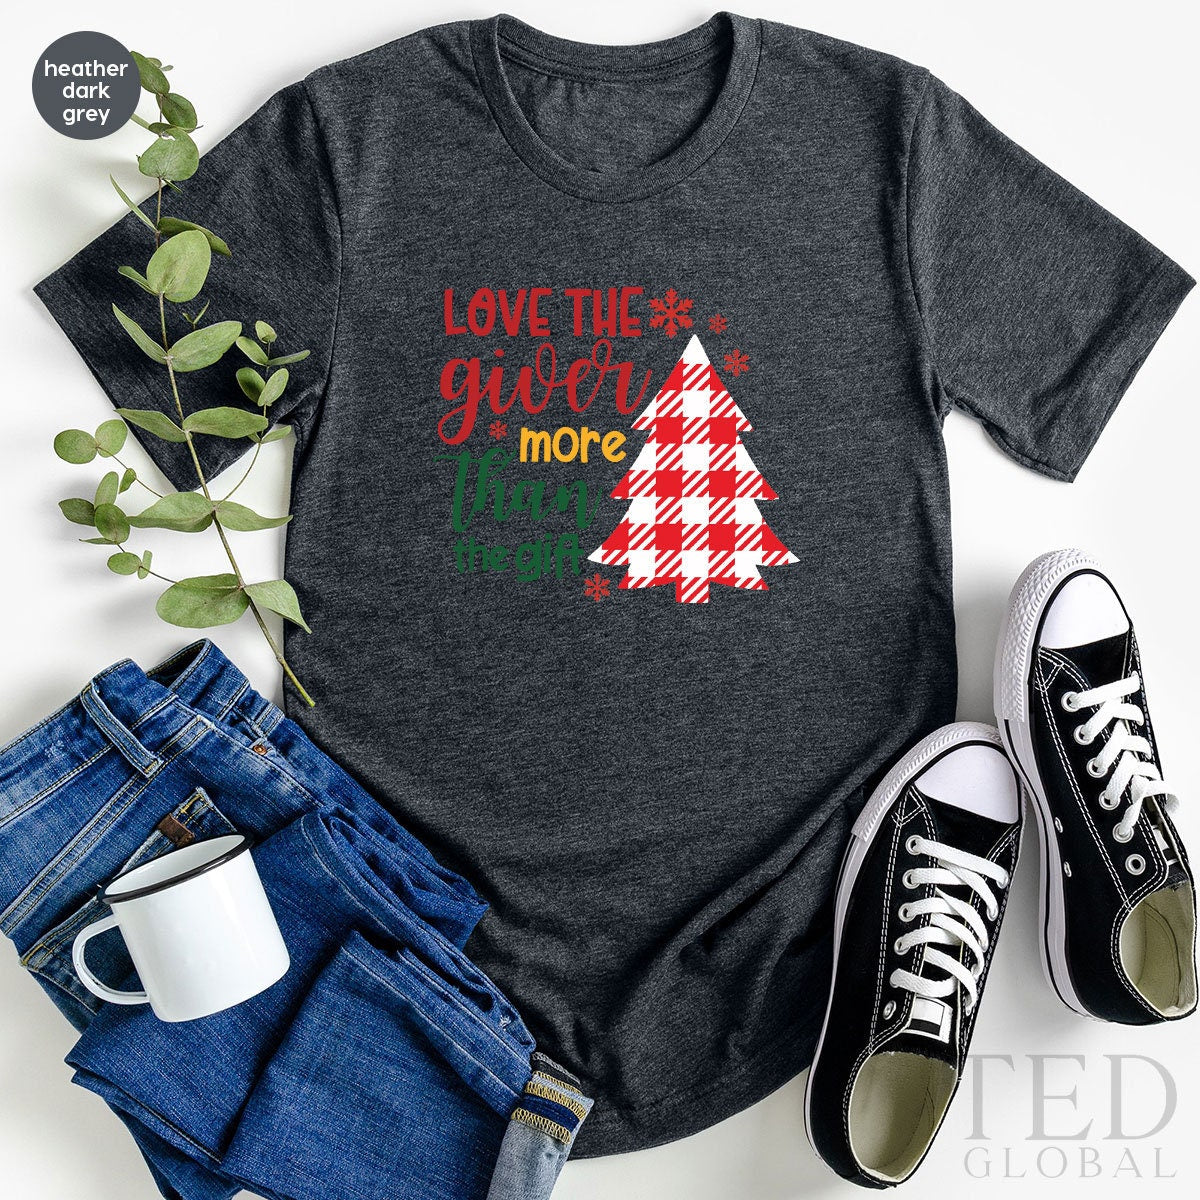 – Ba Official Baking Cute Funny Shirts, T-Shirt, Cookie Christmas Taster